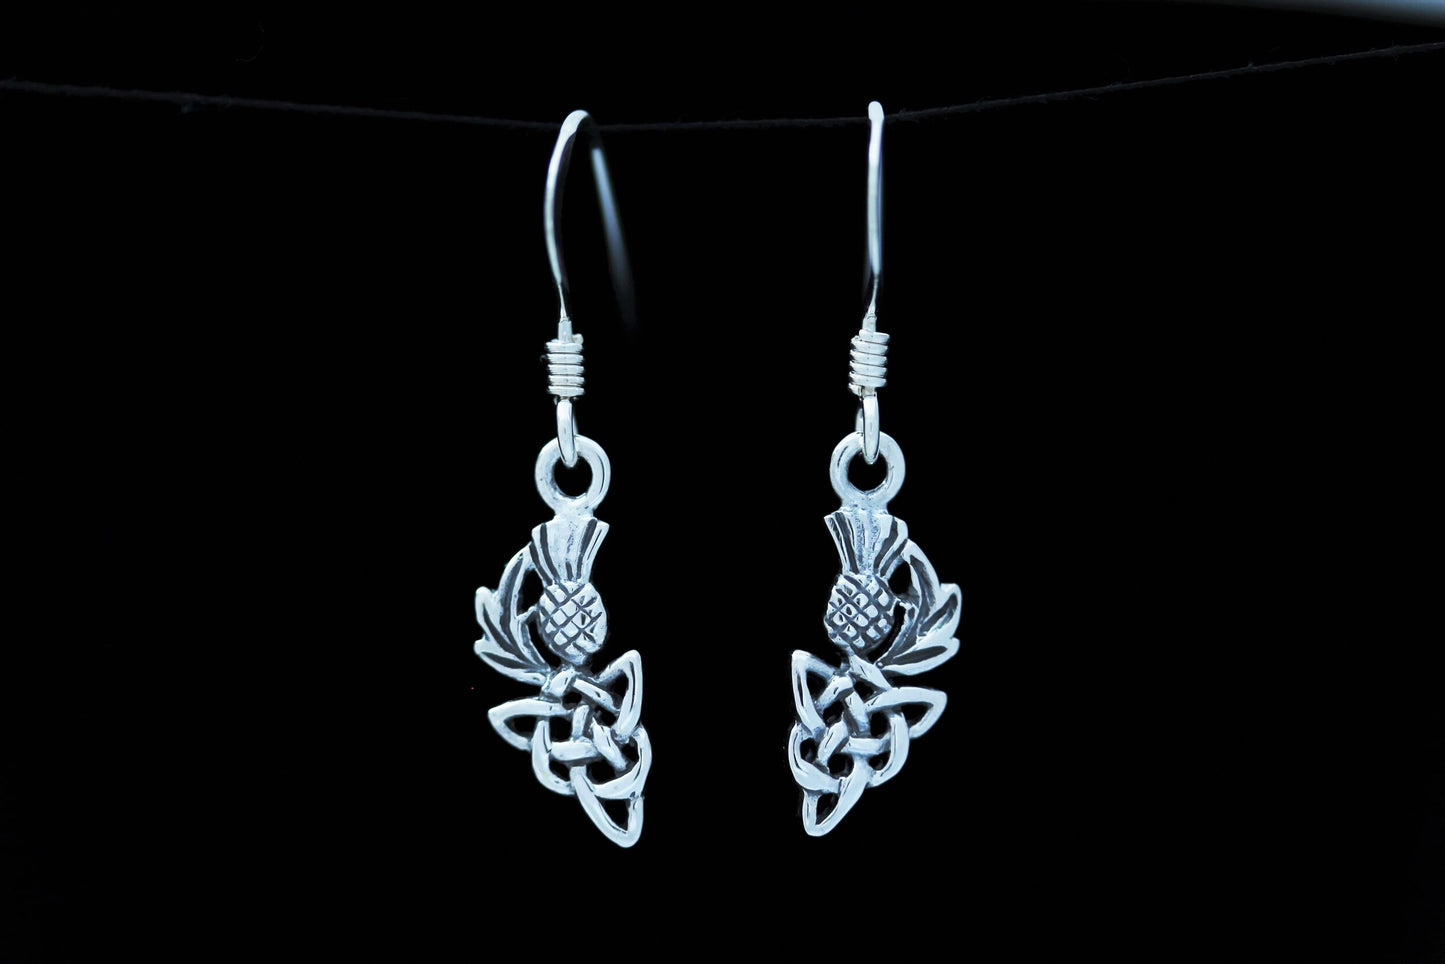 Scottish Thistle Earrings - Small Celtic Knot Roots